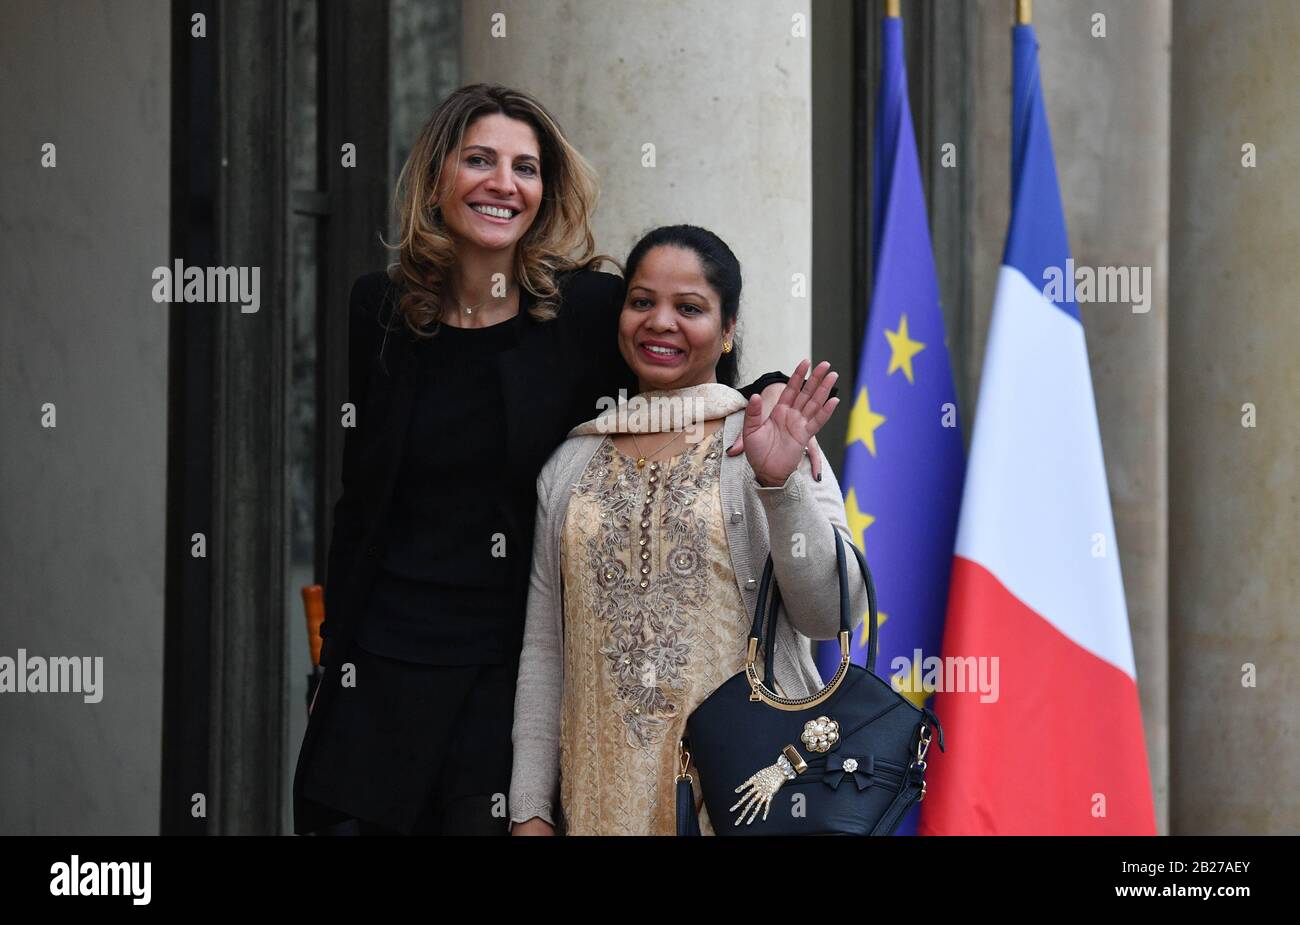 *** STRICTLY NO SALES TO FRENCH MEDIA OR PUBLISHERS - RIGHTS RESERVED ***February 28, 2020 - Paris, France: Asia Bibi (R), a Pakistani Christian, arrives with French journalist Anne-Isabelle Tollet at the Elysee Palace after applying for asylum in France. Asia Bibi, chretienne poursuivie Pakistan pour blaspheme, arrive au palais de l'Elysee, apres avoir depose sa demande d'asile en France. Stock Photo